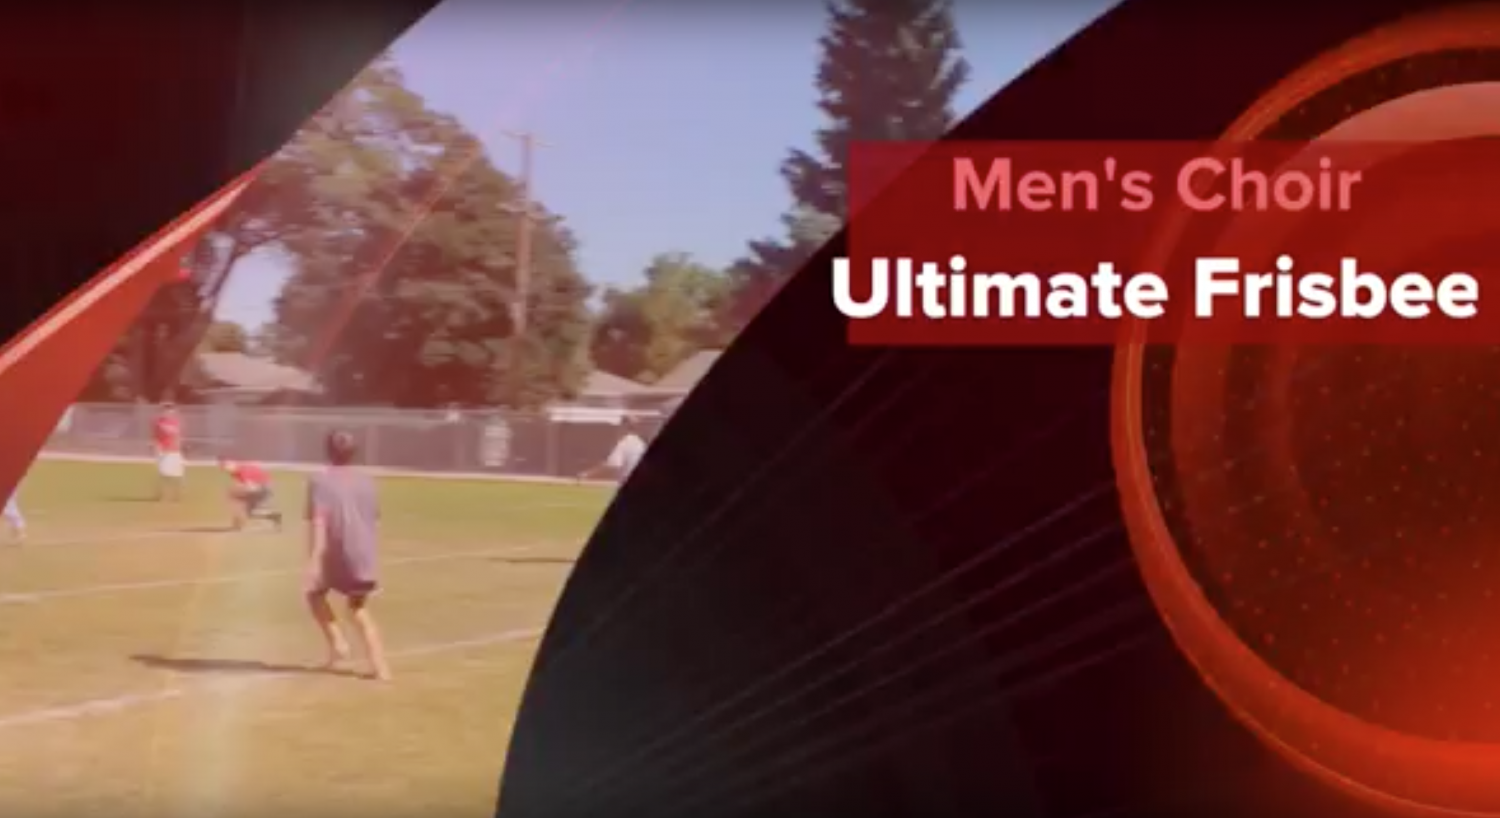 Mens Choir unleashes a game of ultimate Frisbee